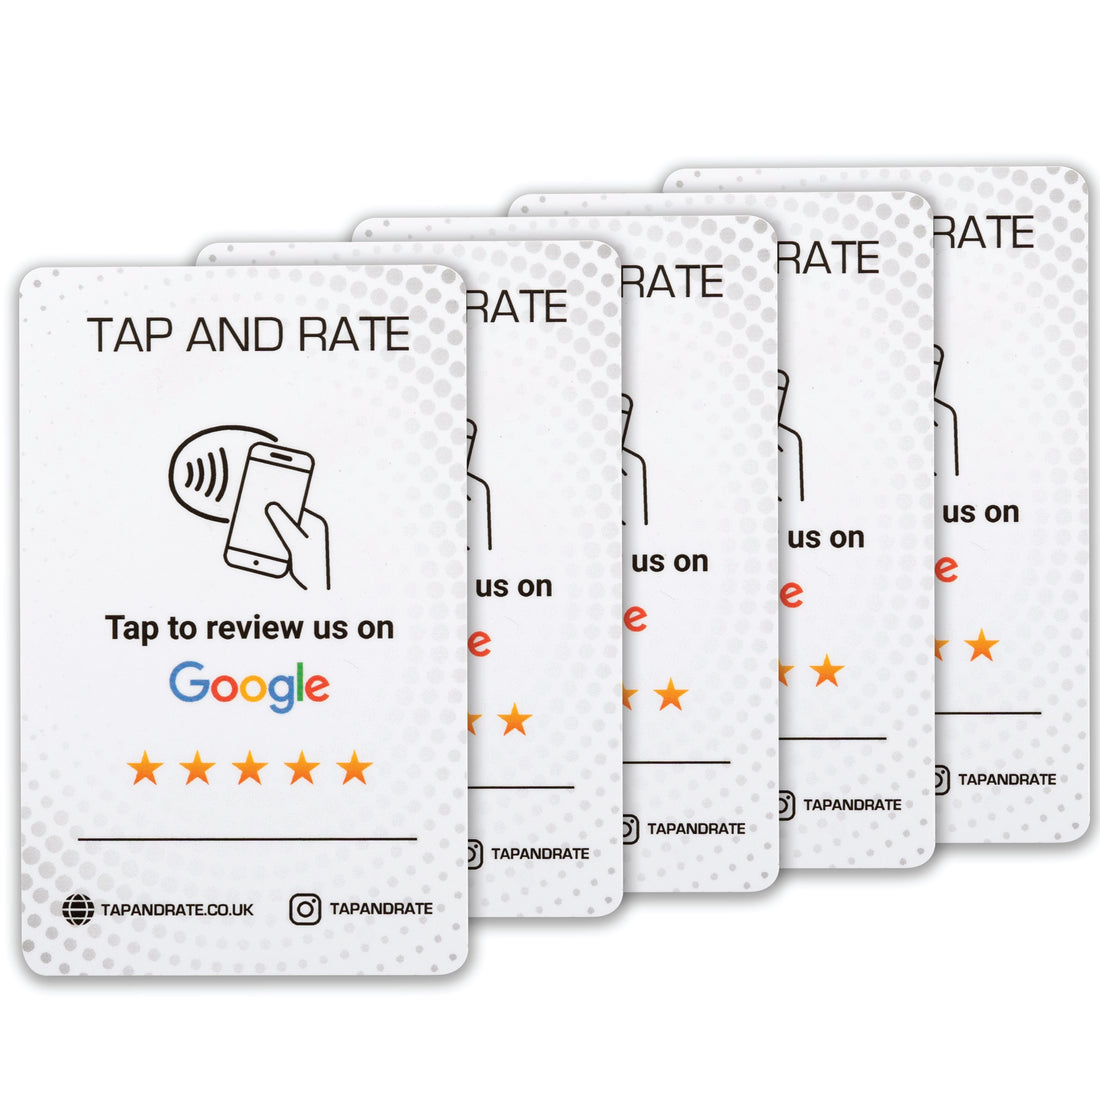 NFC Enabled Google review cards x 5. Best chip, premium quality. Customers can leave you a google review with just one simple tap. No searching or finding your business, comes preprogramed to your business so all the customer has to do is tap their phone and leave a review. Ready to use out of the box! Start getting more 5 Star reviews today. Get more Customer with this simple to use product. Tap and Rate